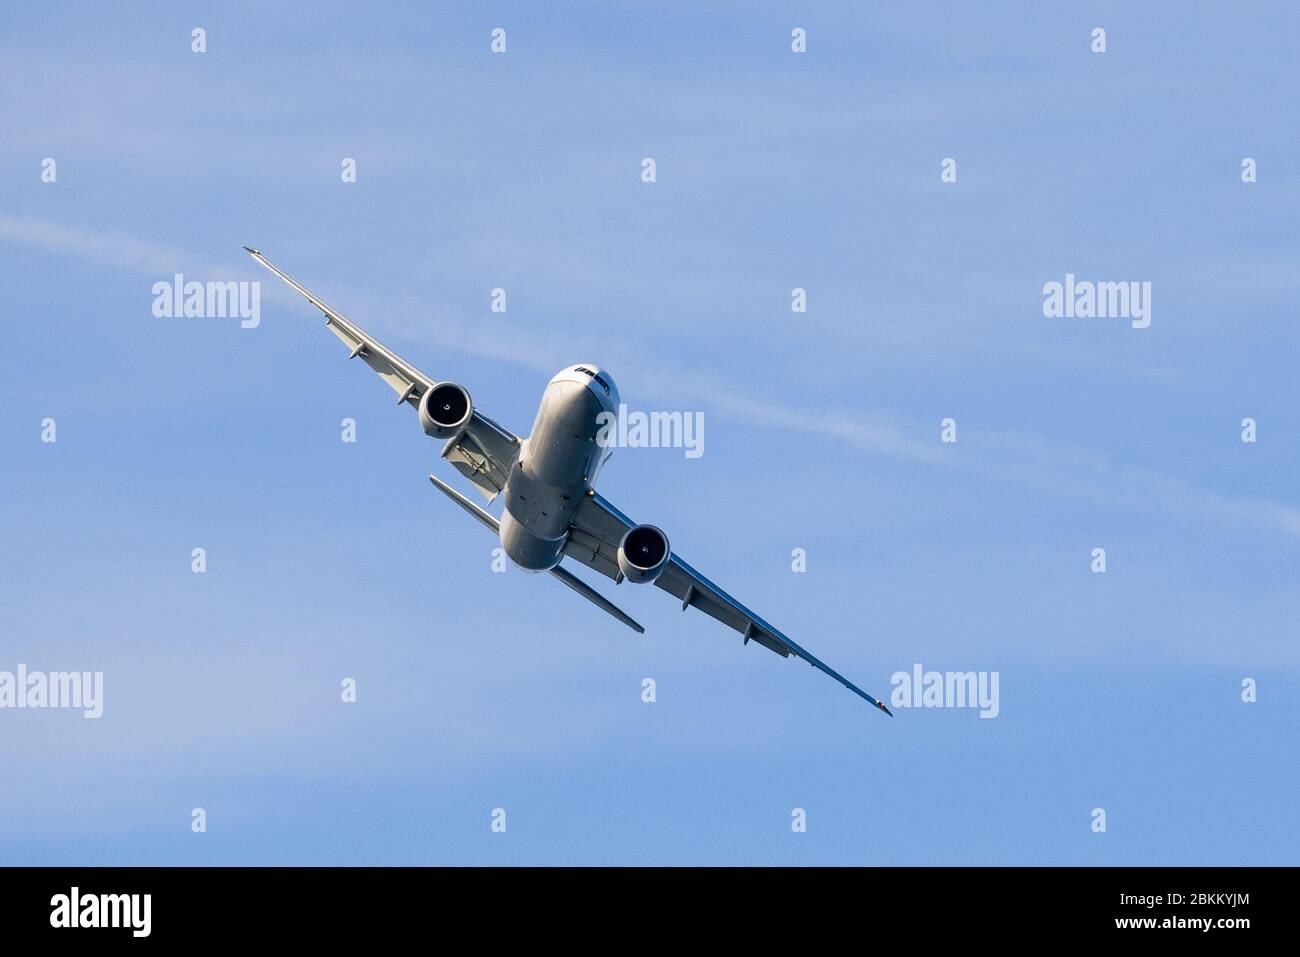 Large commercial airplane making a turn; blue sky background Stock Photo